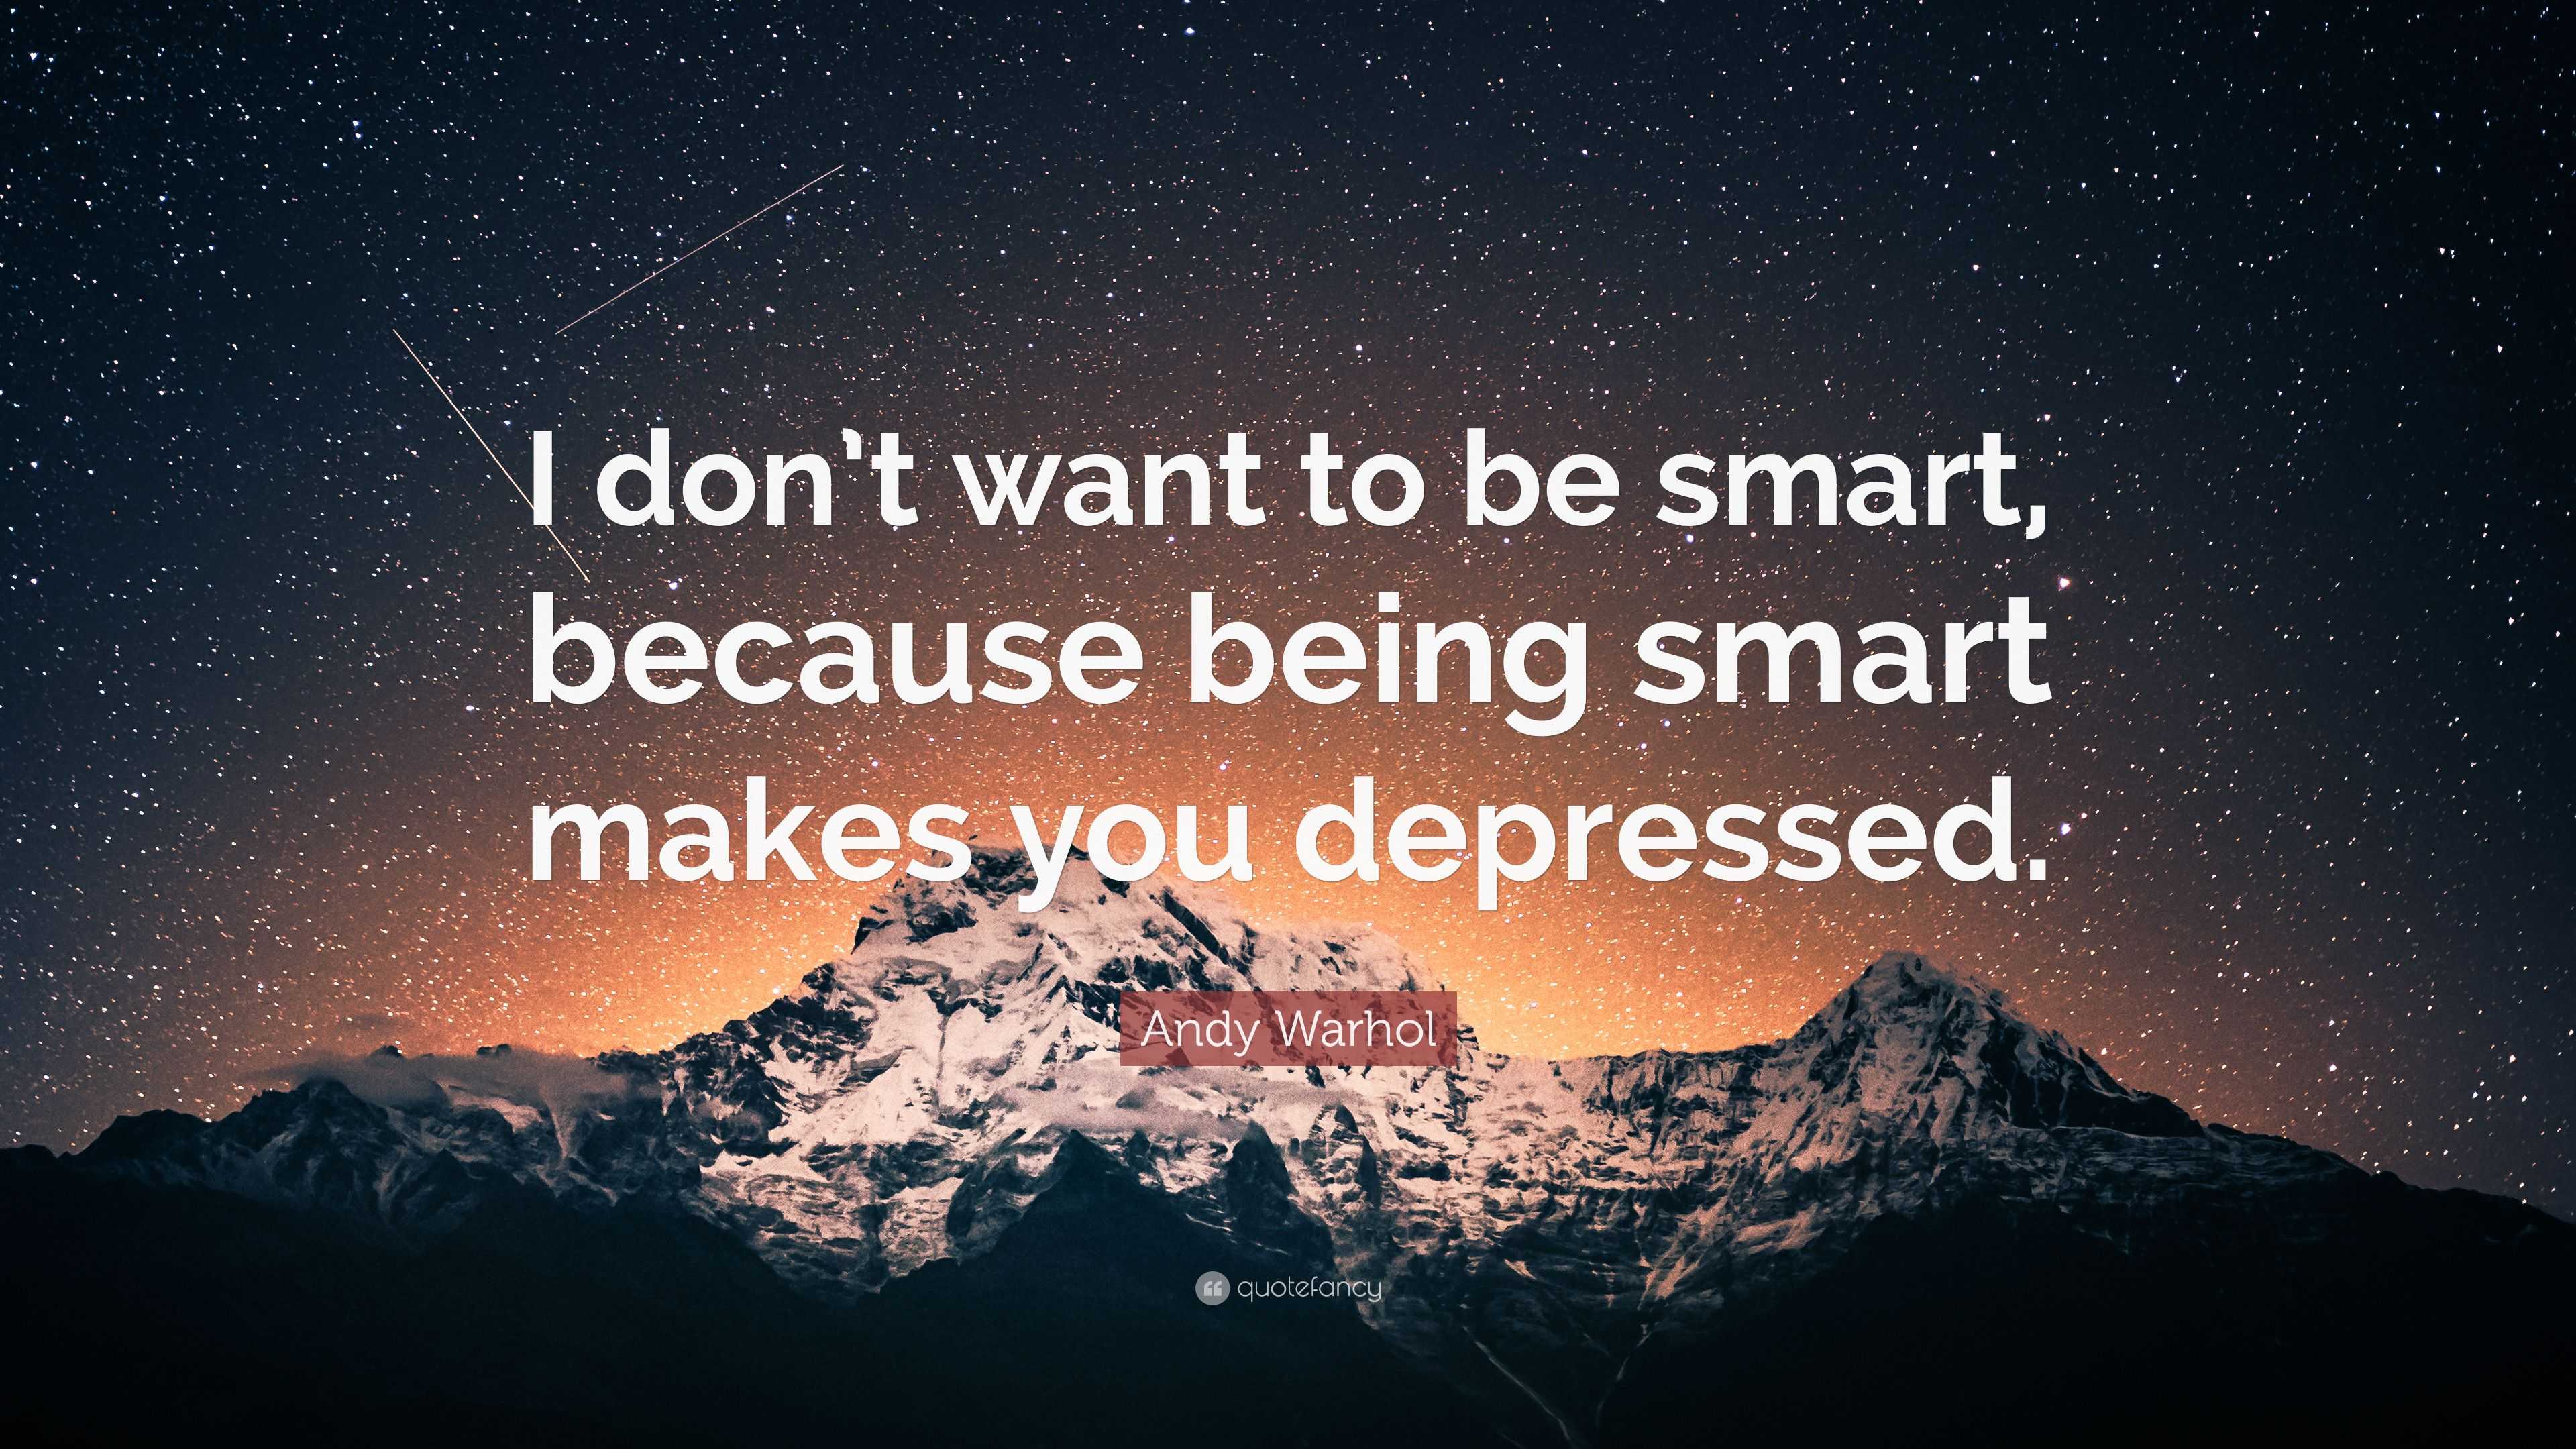 Andy Warhol Quote “I don’t want to be smart, because